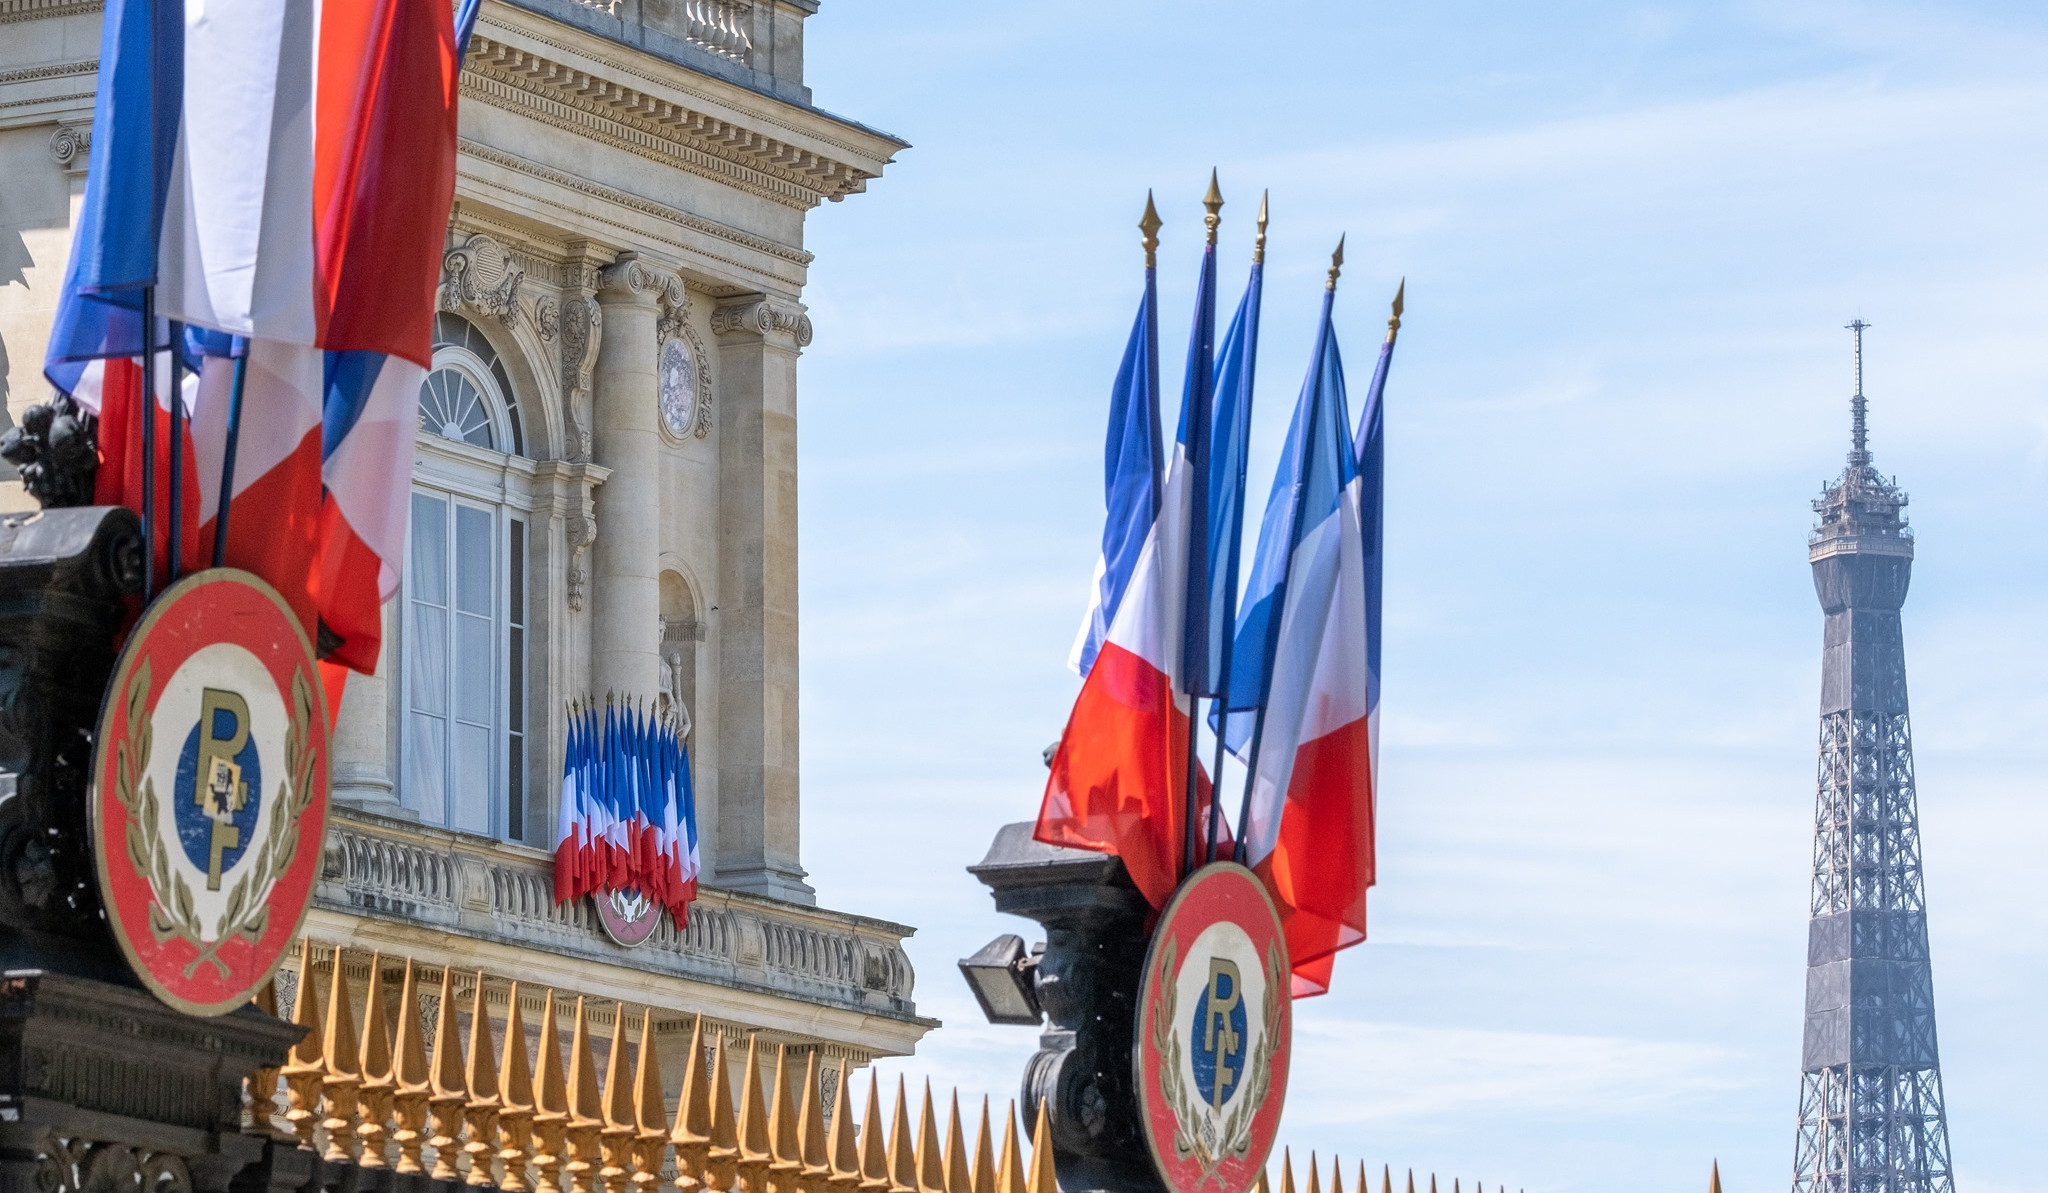 France reaffirms its commitment to support sovereignty and integrity of Armenia: Stéphane Séjourné